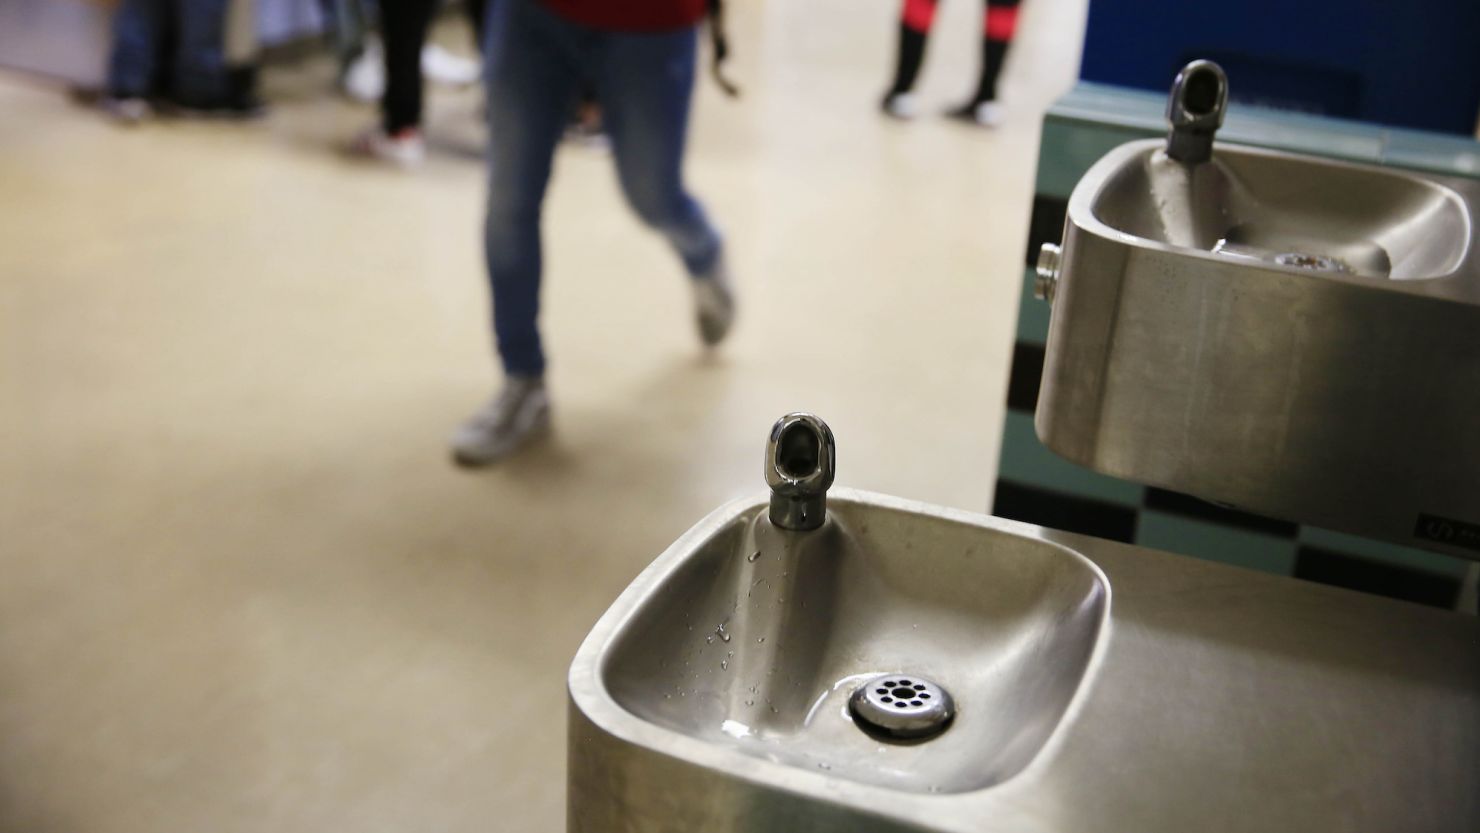 Students walk by a water fountain that was cleared for use at San Francisco International High School  on Wednesday, October 25, 2017 in San Francisco, Calif. (Lea Suzuki/San Francisco Chronicle via AP)